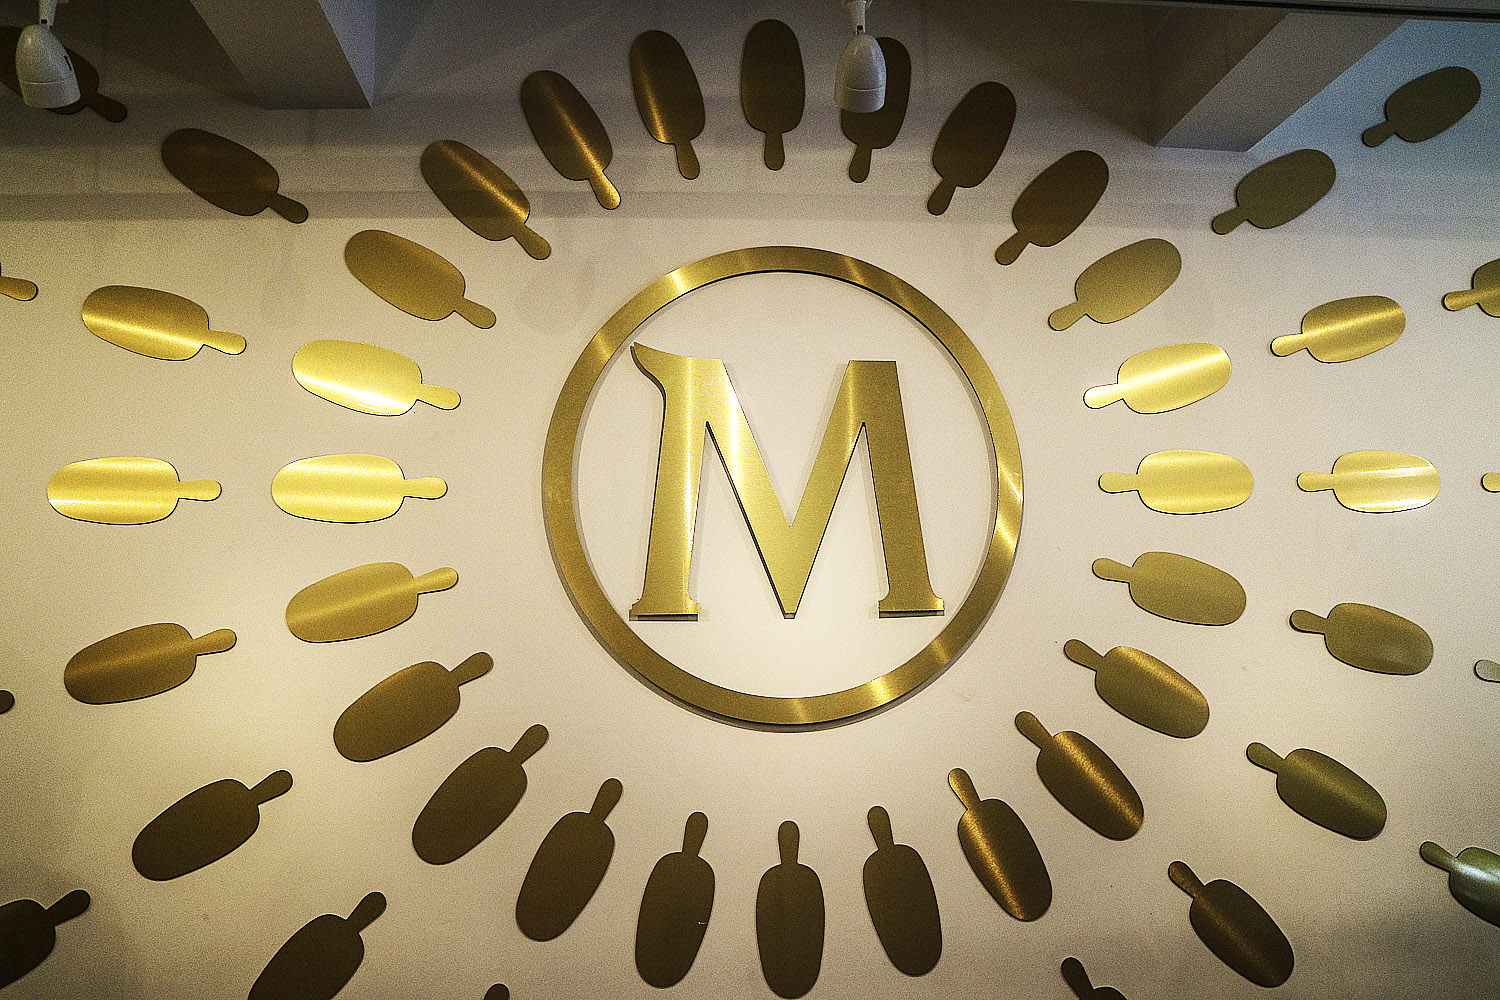 Magnum-Store-London-1 My experience at the Magnum Pleasure Store London